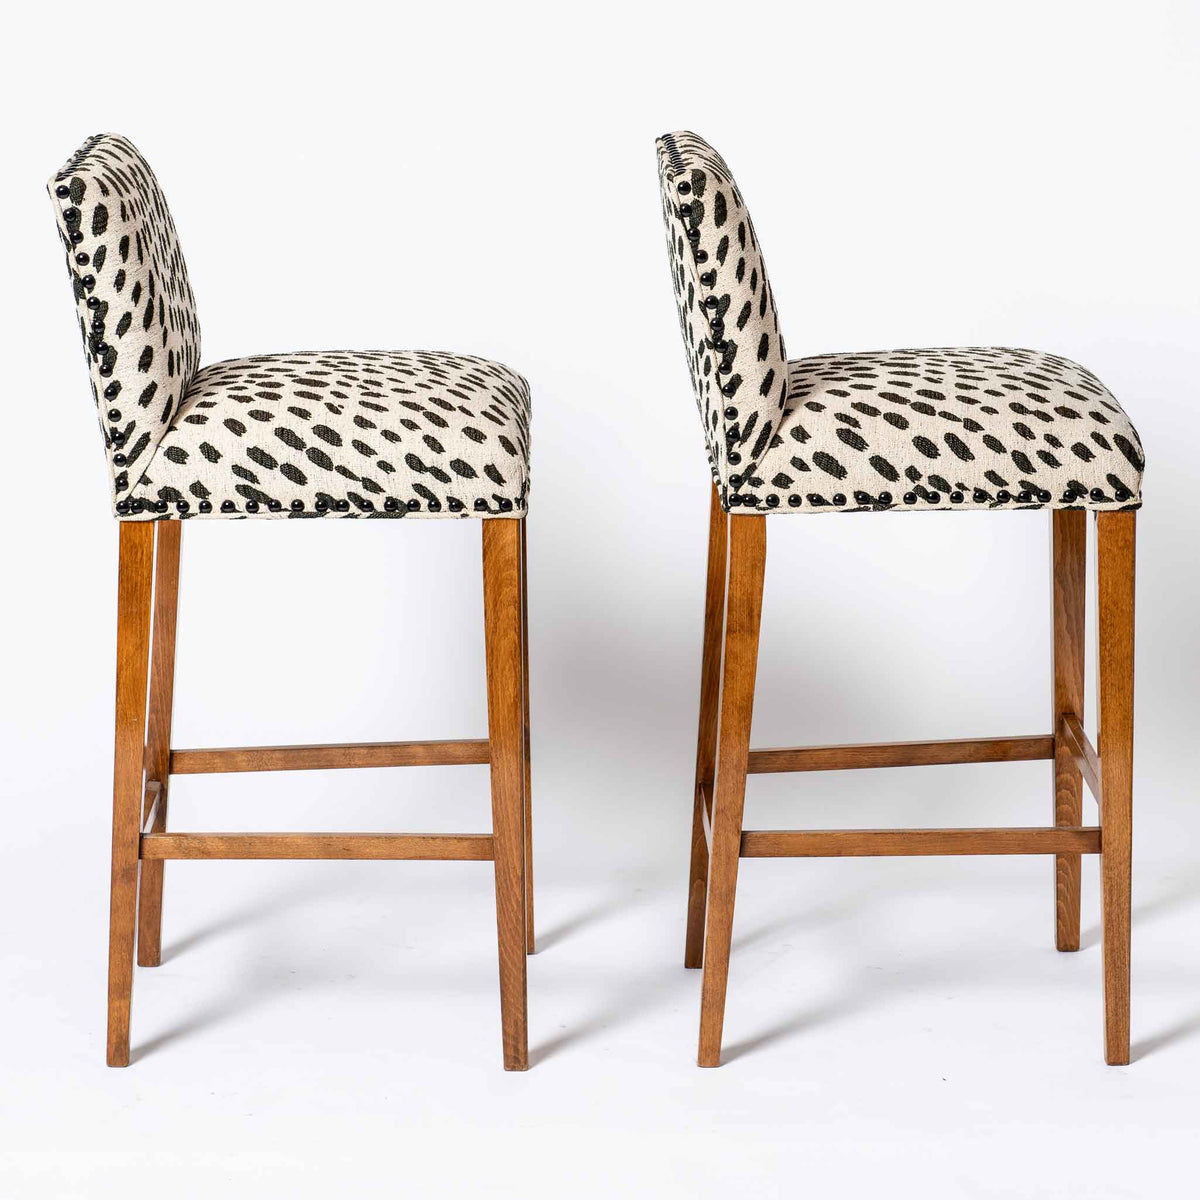 Upholstered Tall Chairs S2 F11